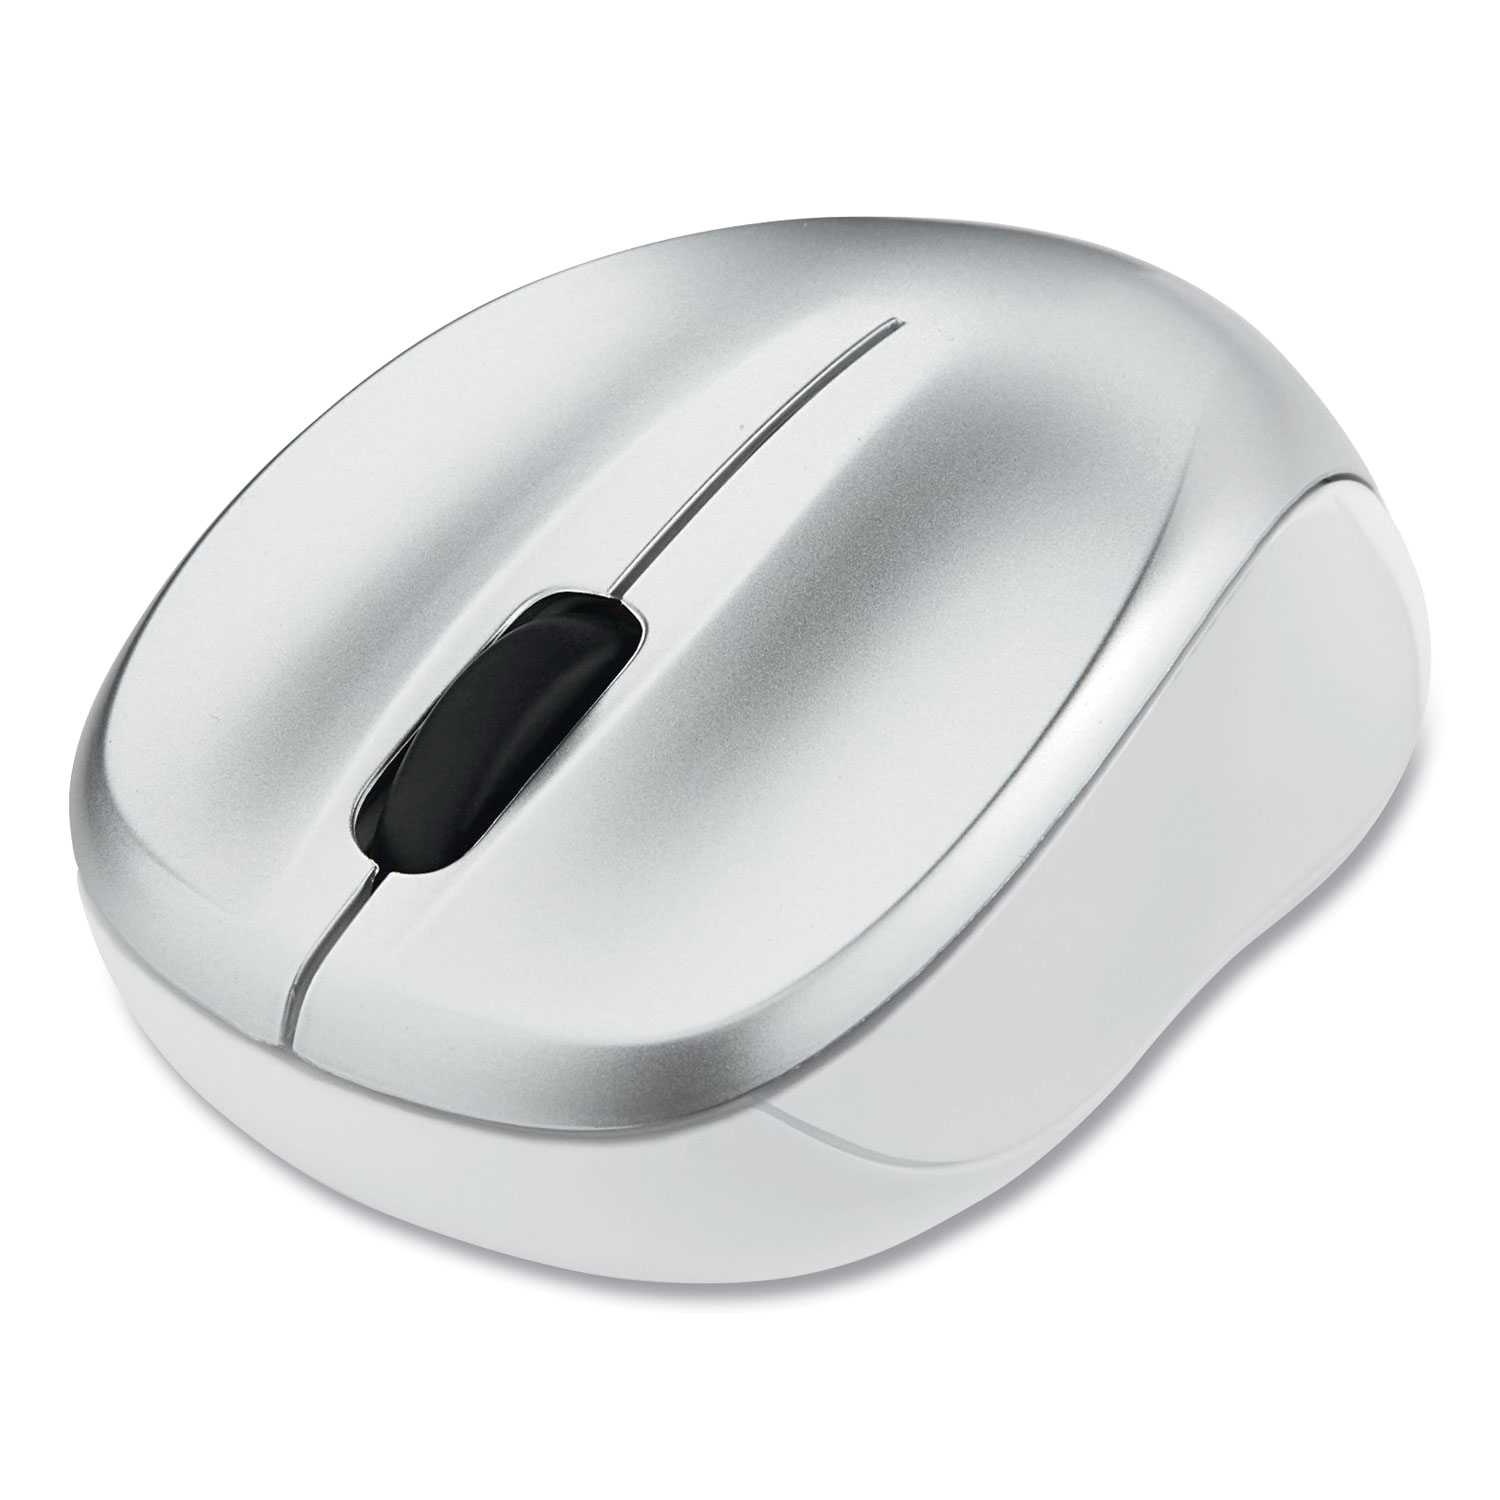 Silent Blue LED Mouse, 2.4 GHz ft Wireless Range, Left/Right Hand Use, Silver Lighthouse Office Supply